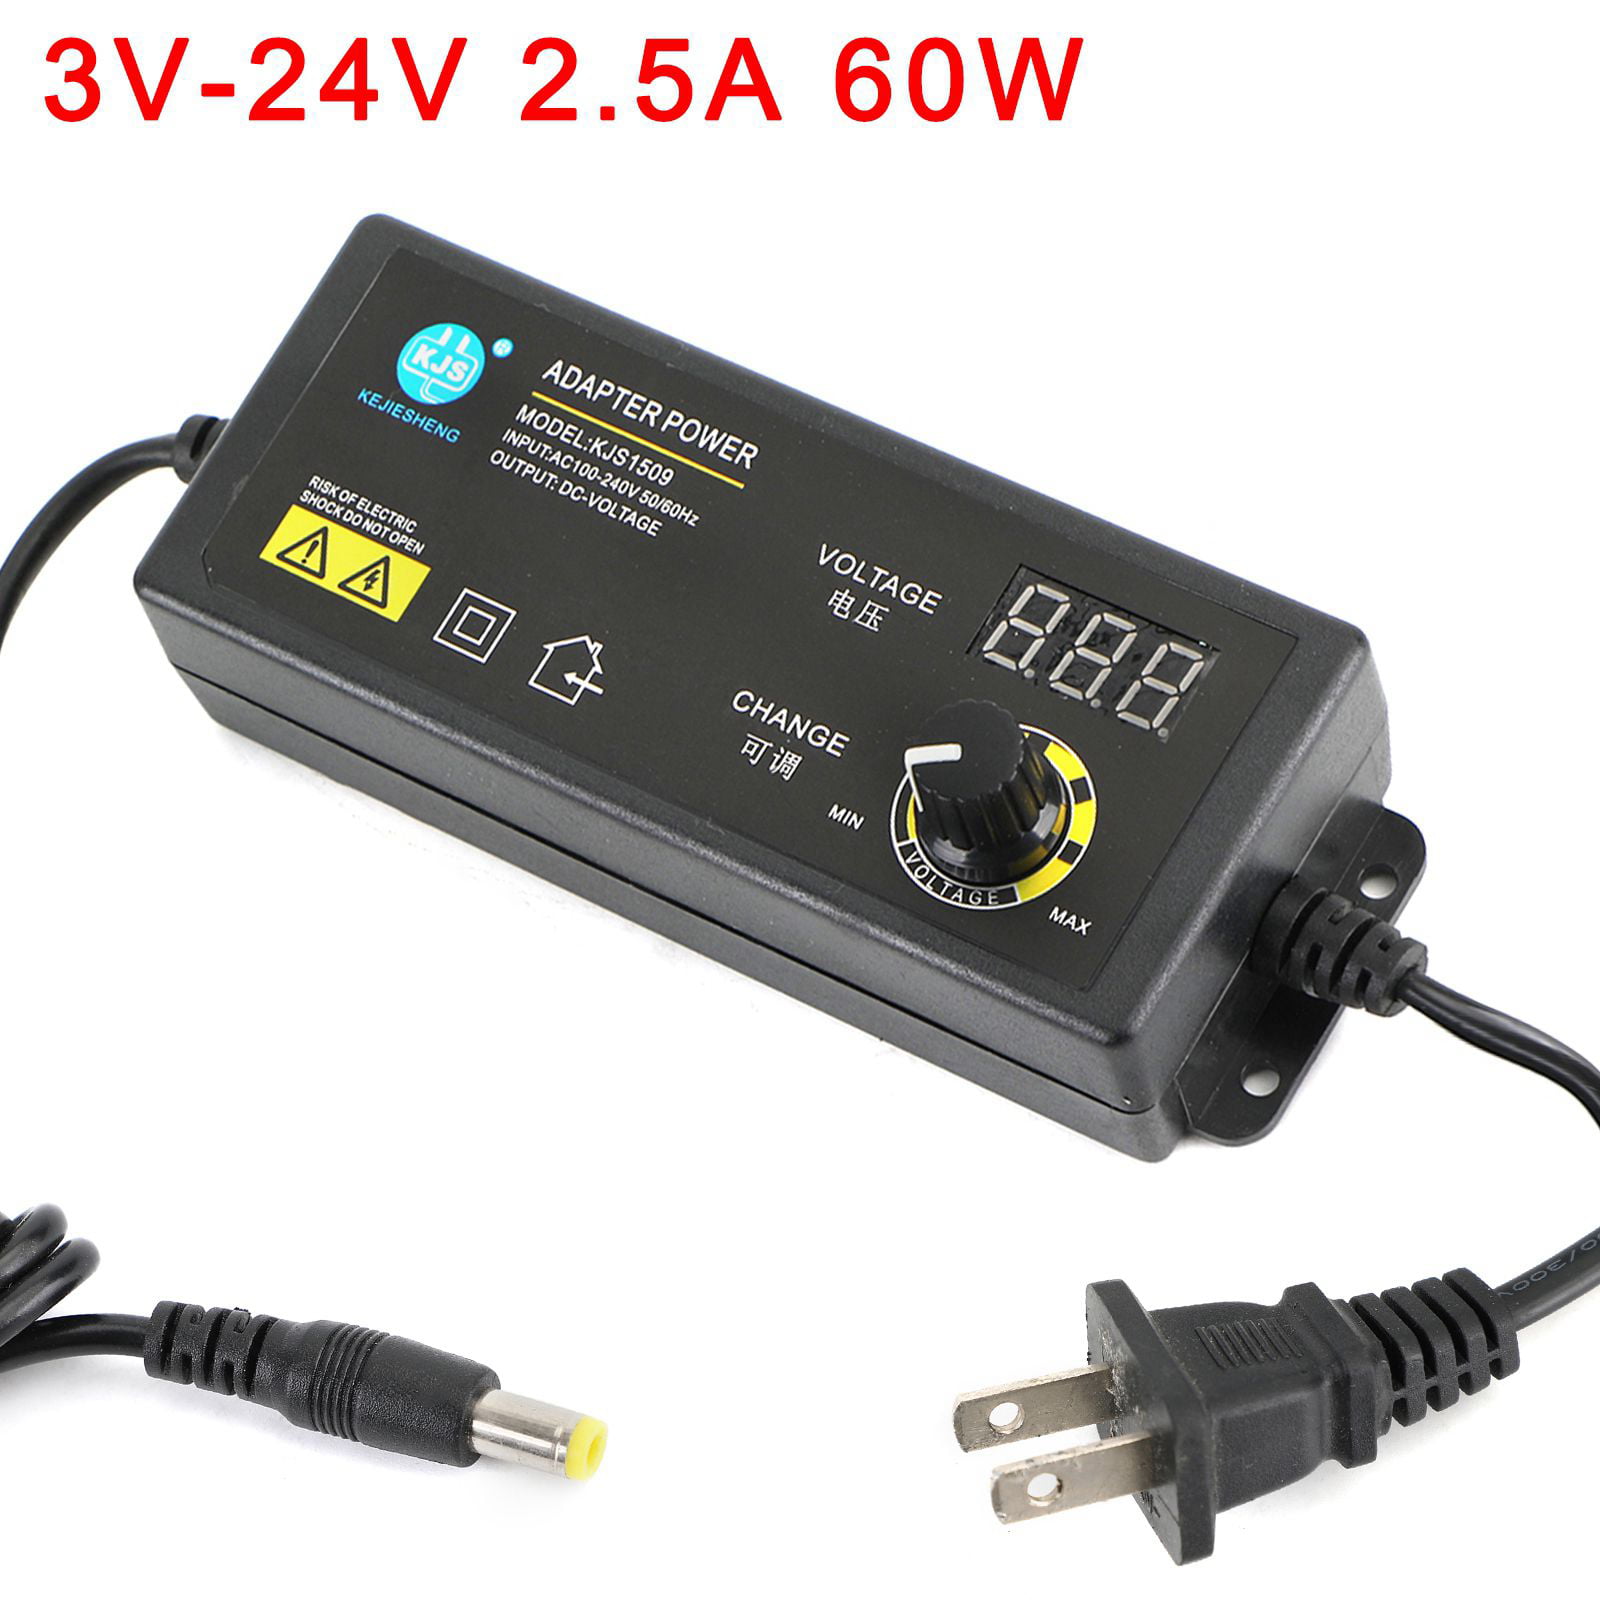 Adjustable Voltage 3 to 24V AC /DC Switch Power Supply Adapter with LED Display. 